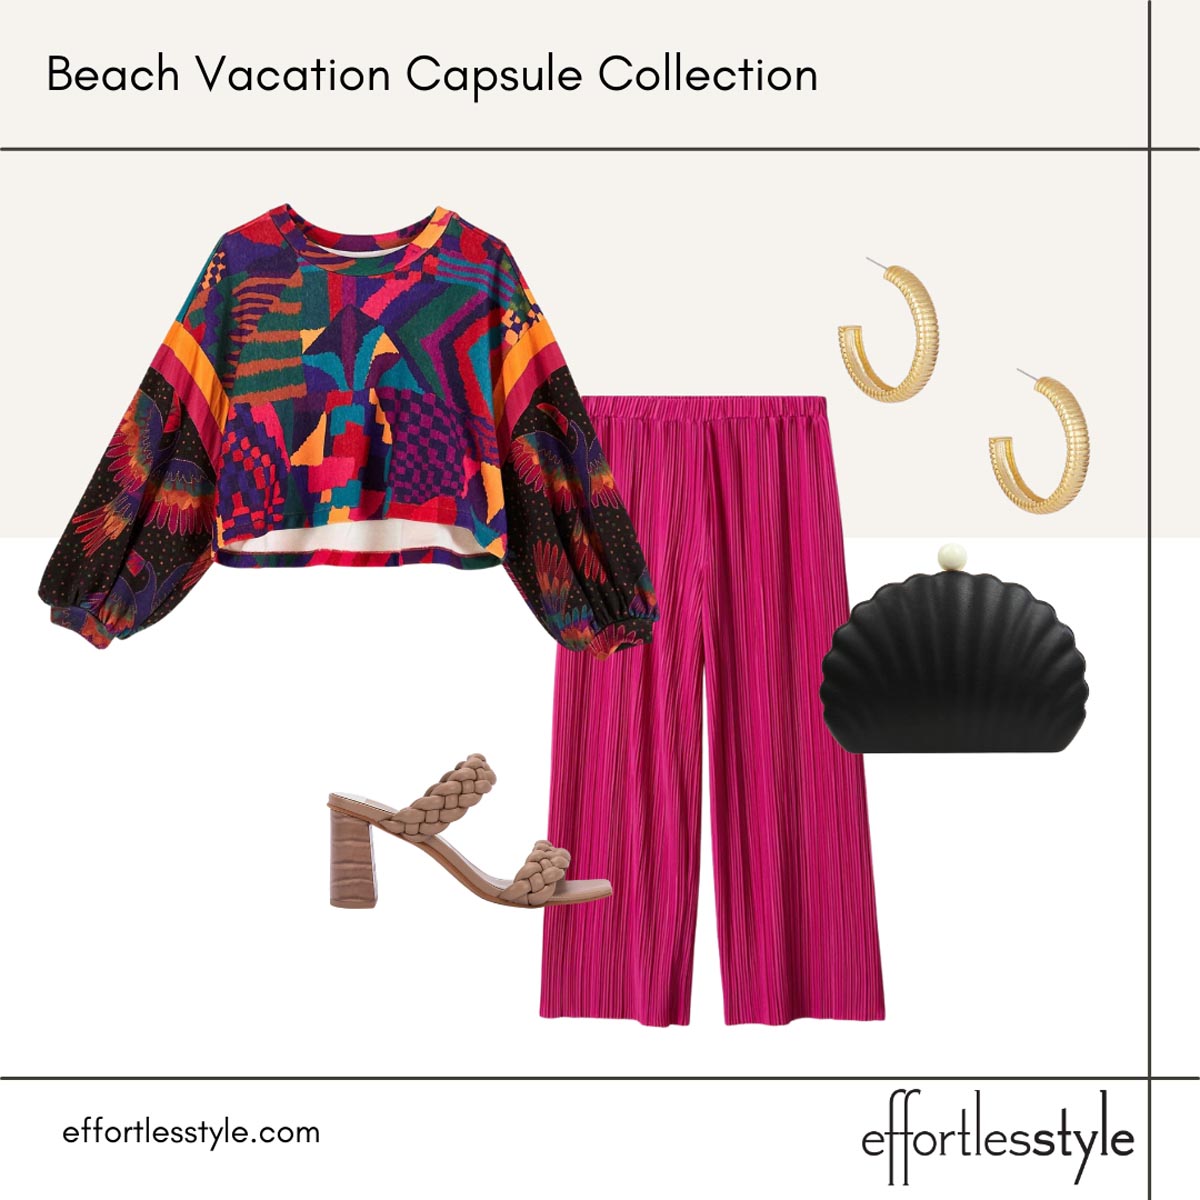 Beach vacation capsule styled looks patterned sweatshirt palazzo pants how to style palazzo pants how to wear a sweatshirt with flow pants fun clutch for spring fun clutch for summer clutch with removable strap